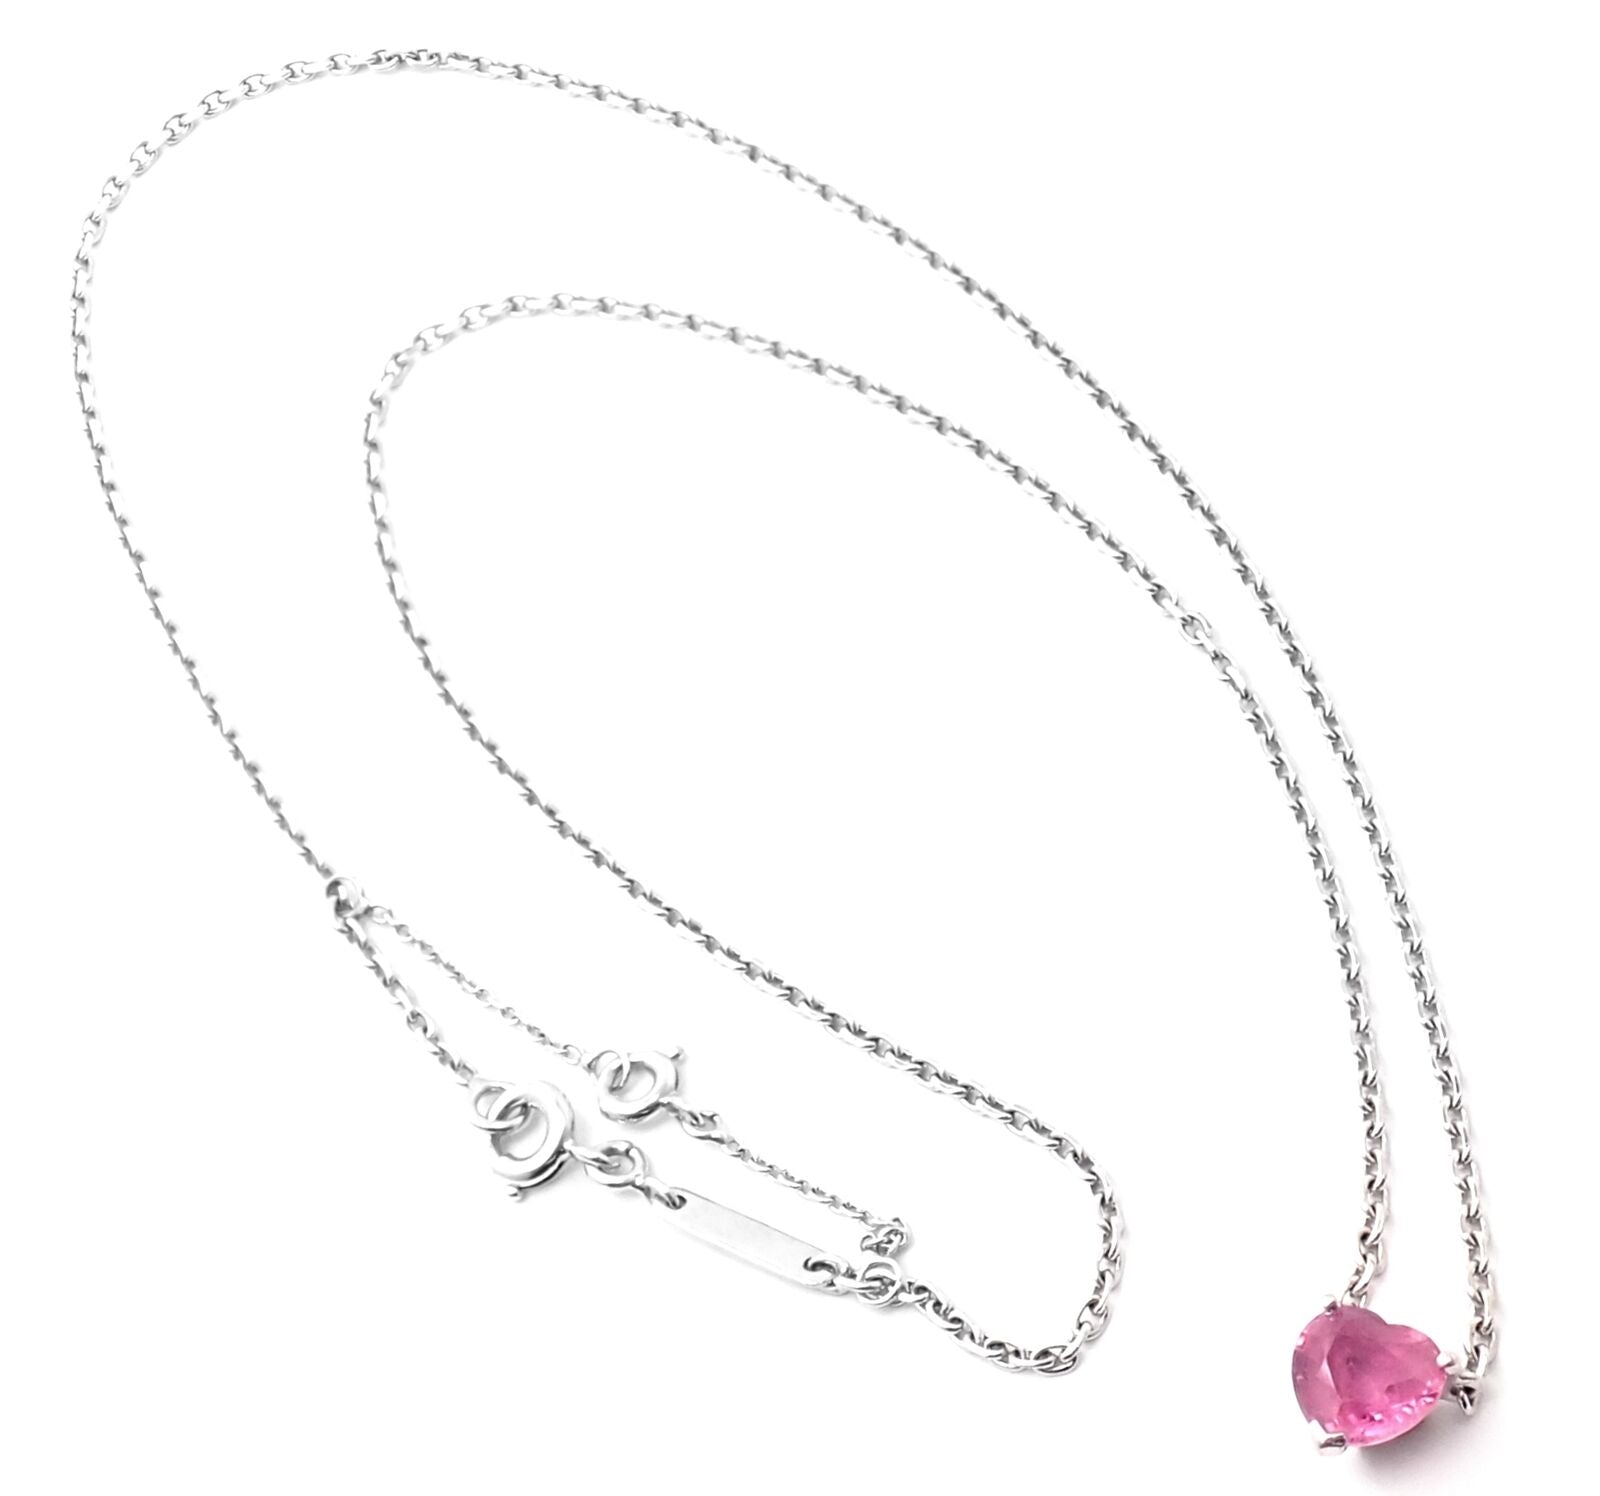 Cartier Jewelry & Watches:Fine Jewelry:Necklaces & Pendants Authentic! Cartier 18k White Gold Heart Shape Pink Sapphire Pendant Necklace